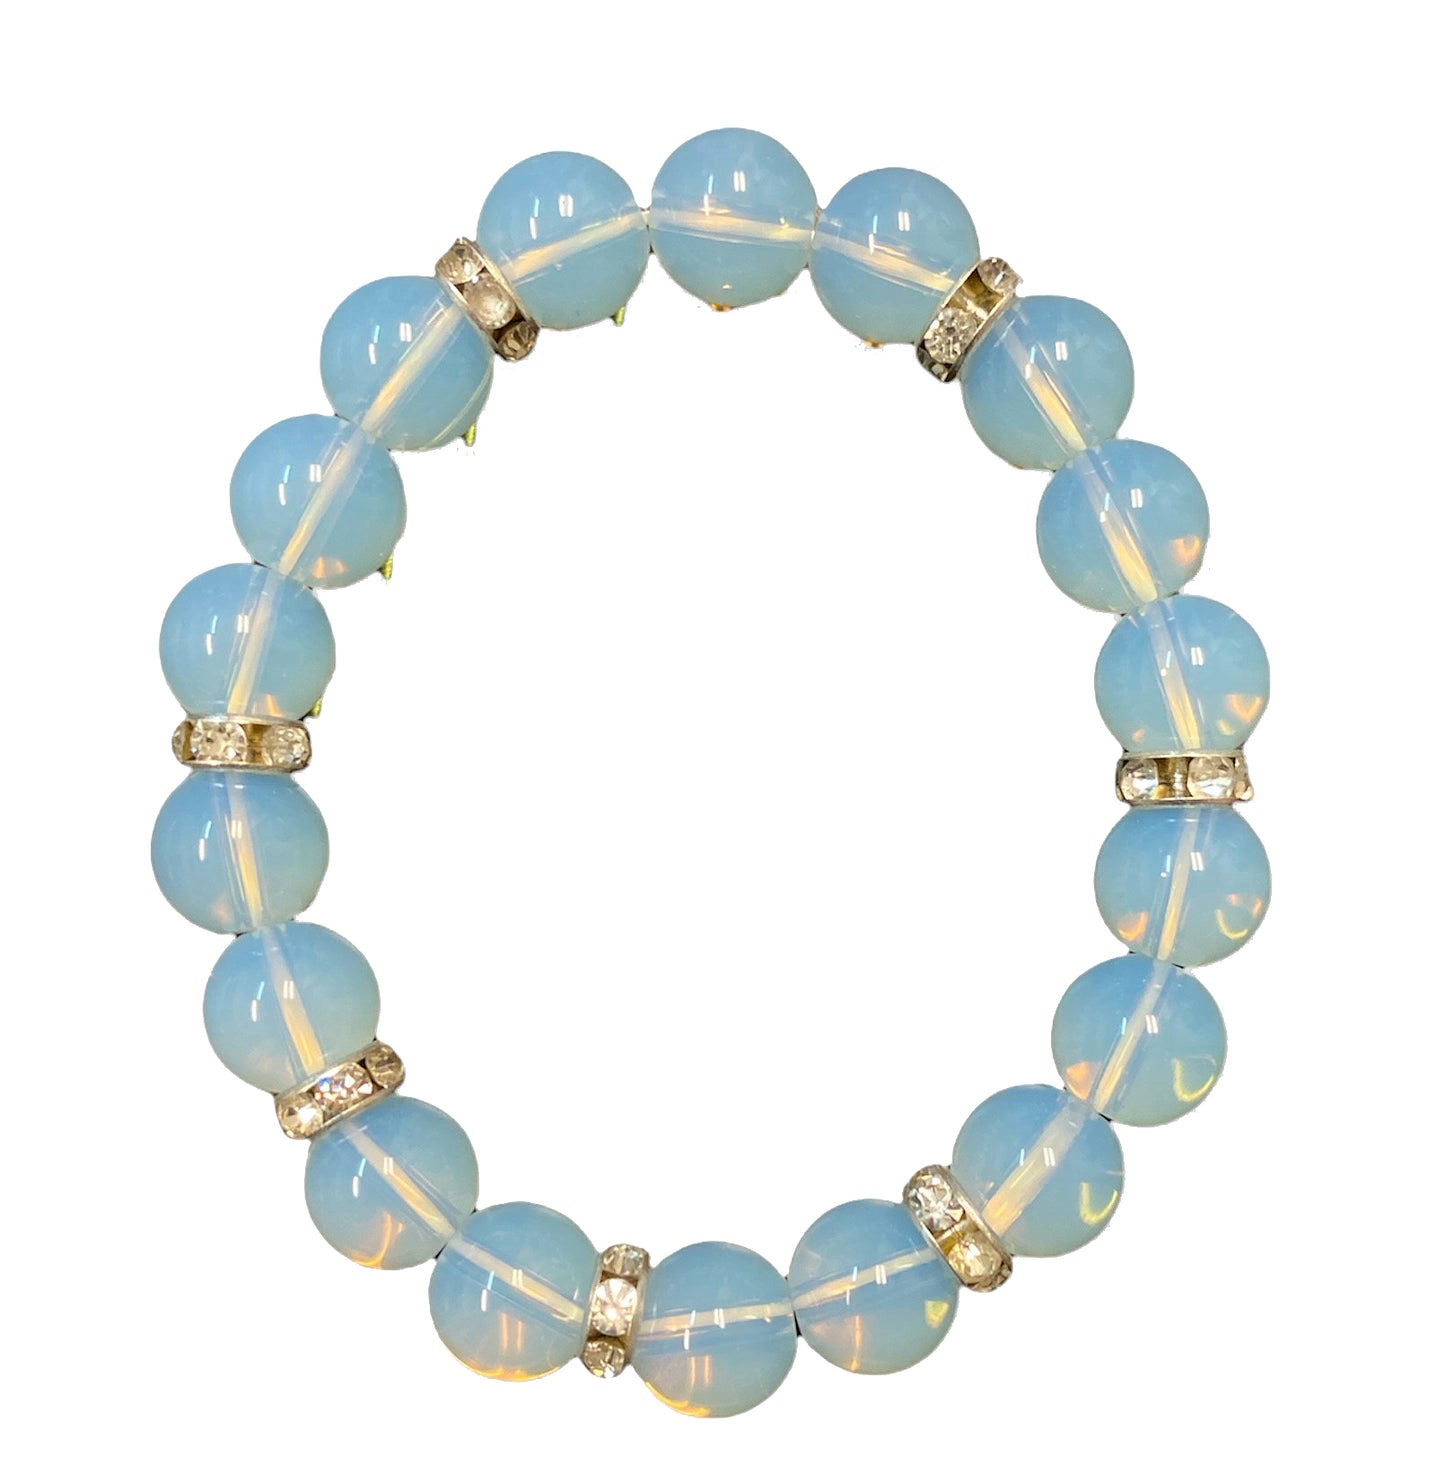 Opalite Bracelet with Rhinestone Spacers - 10mm - NEW1021 - Synthetic